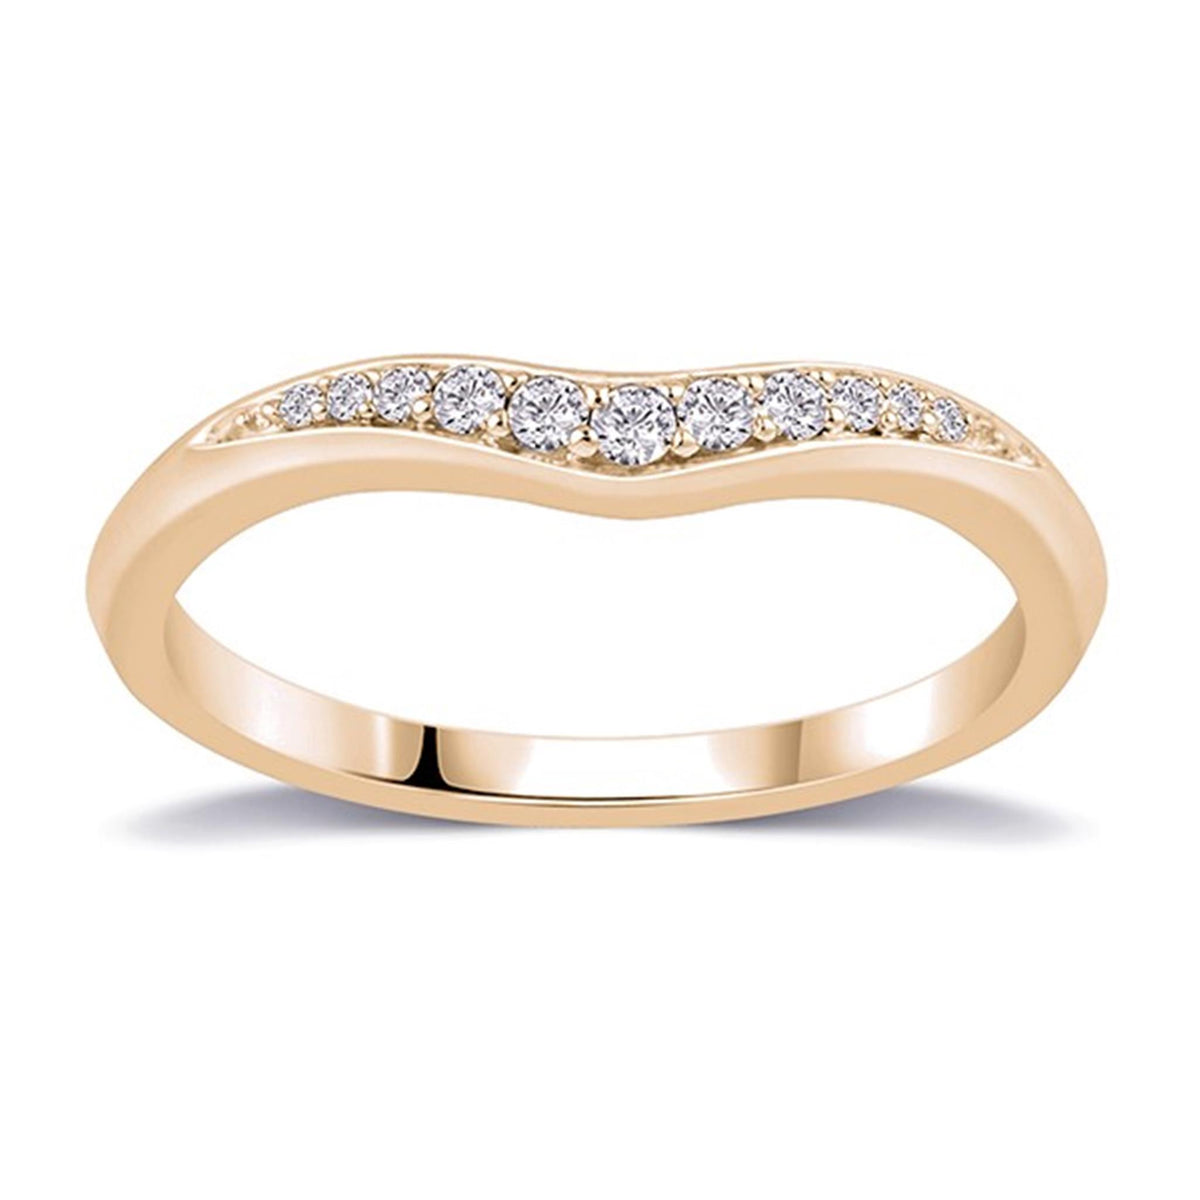 14Kt Yellow Gold Curved Wedding Ring With 0.12cttw Natural Diamonds